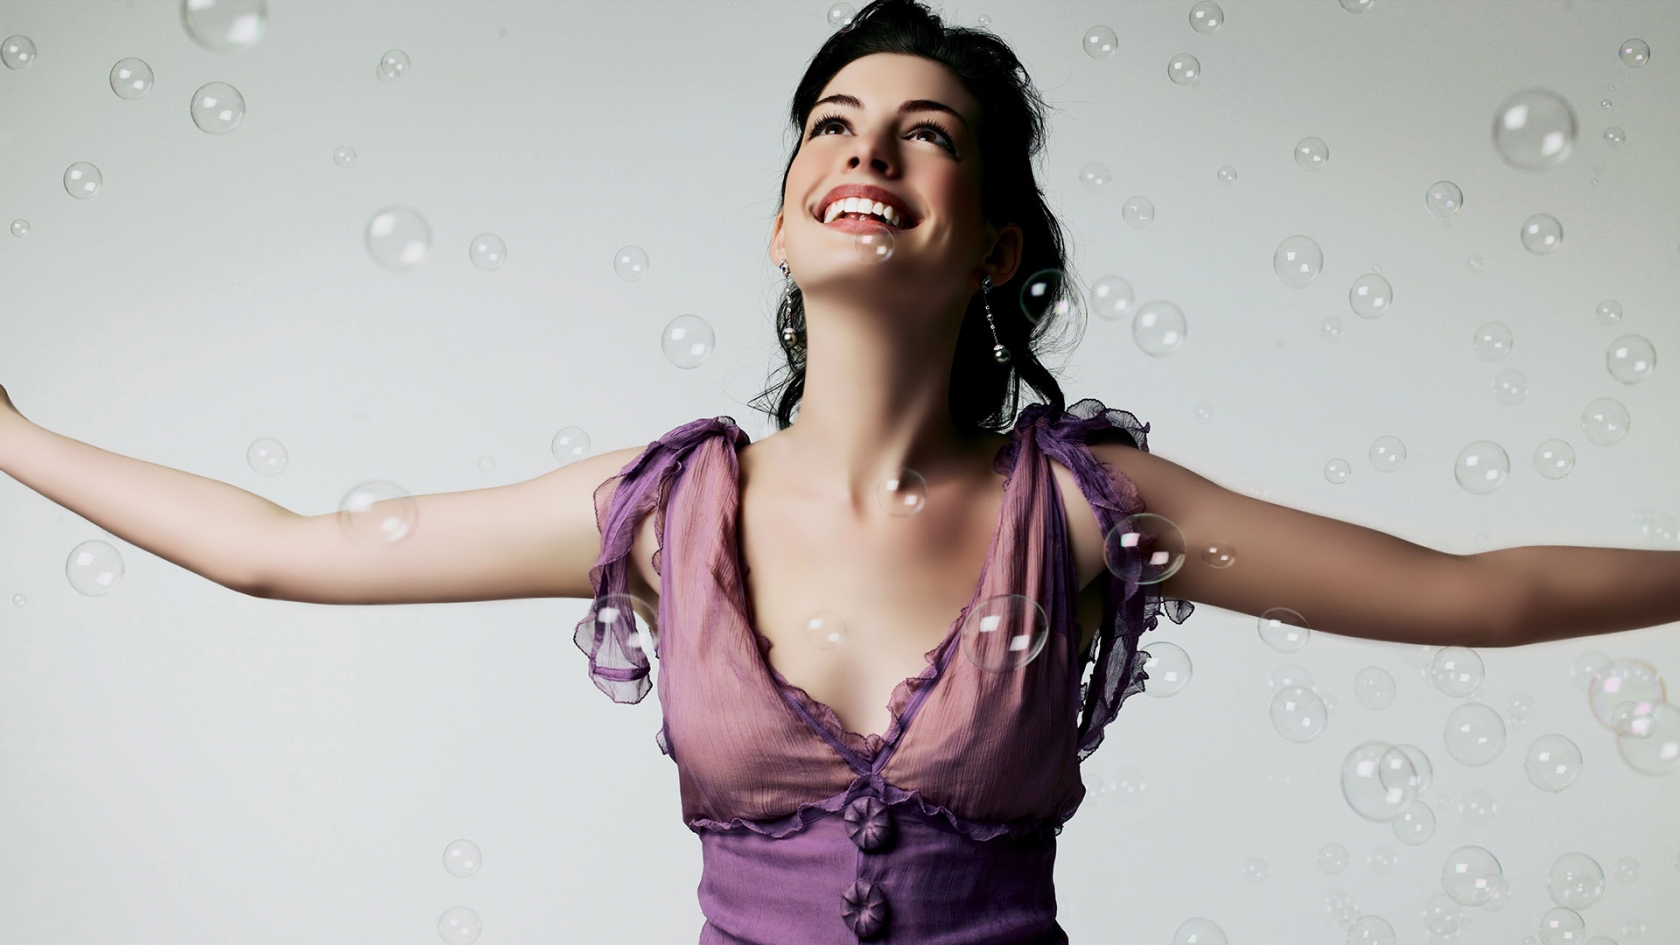 Anne Hathaway Bubbles for 1680 x 945 HDTV resolution